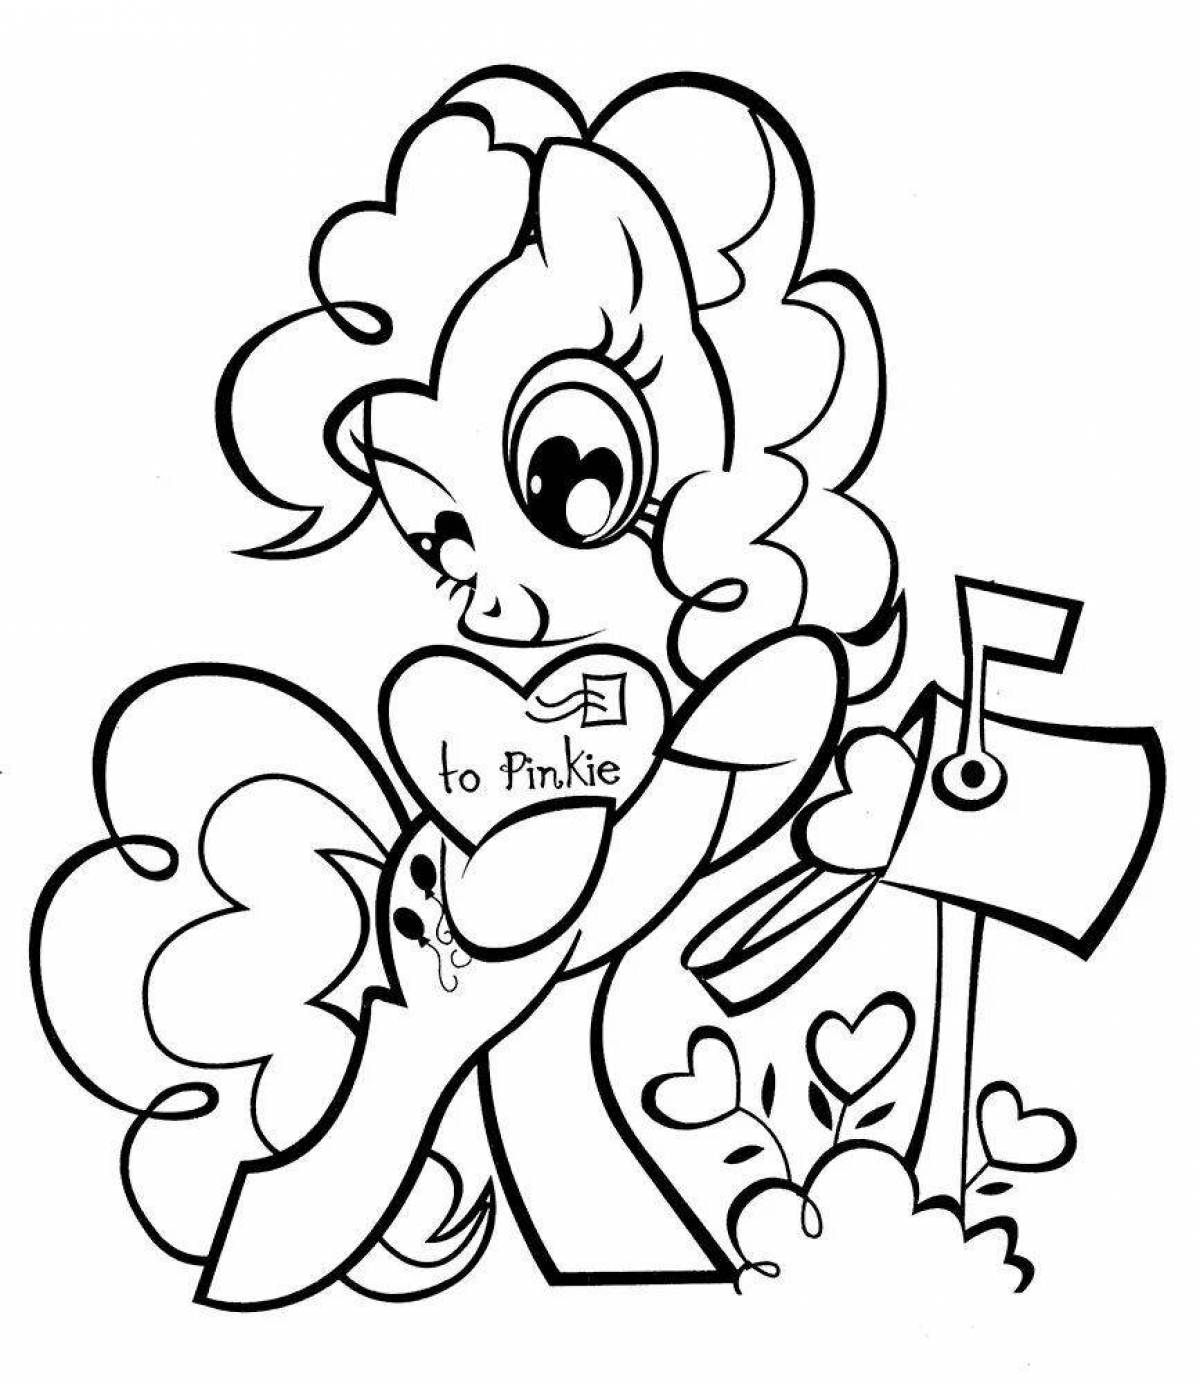 Pinkie Pie's dazzling pony coloring book